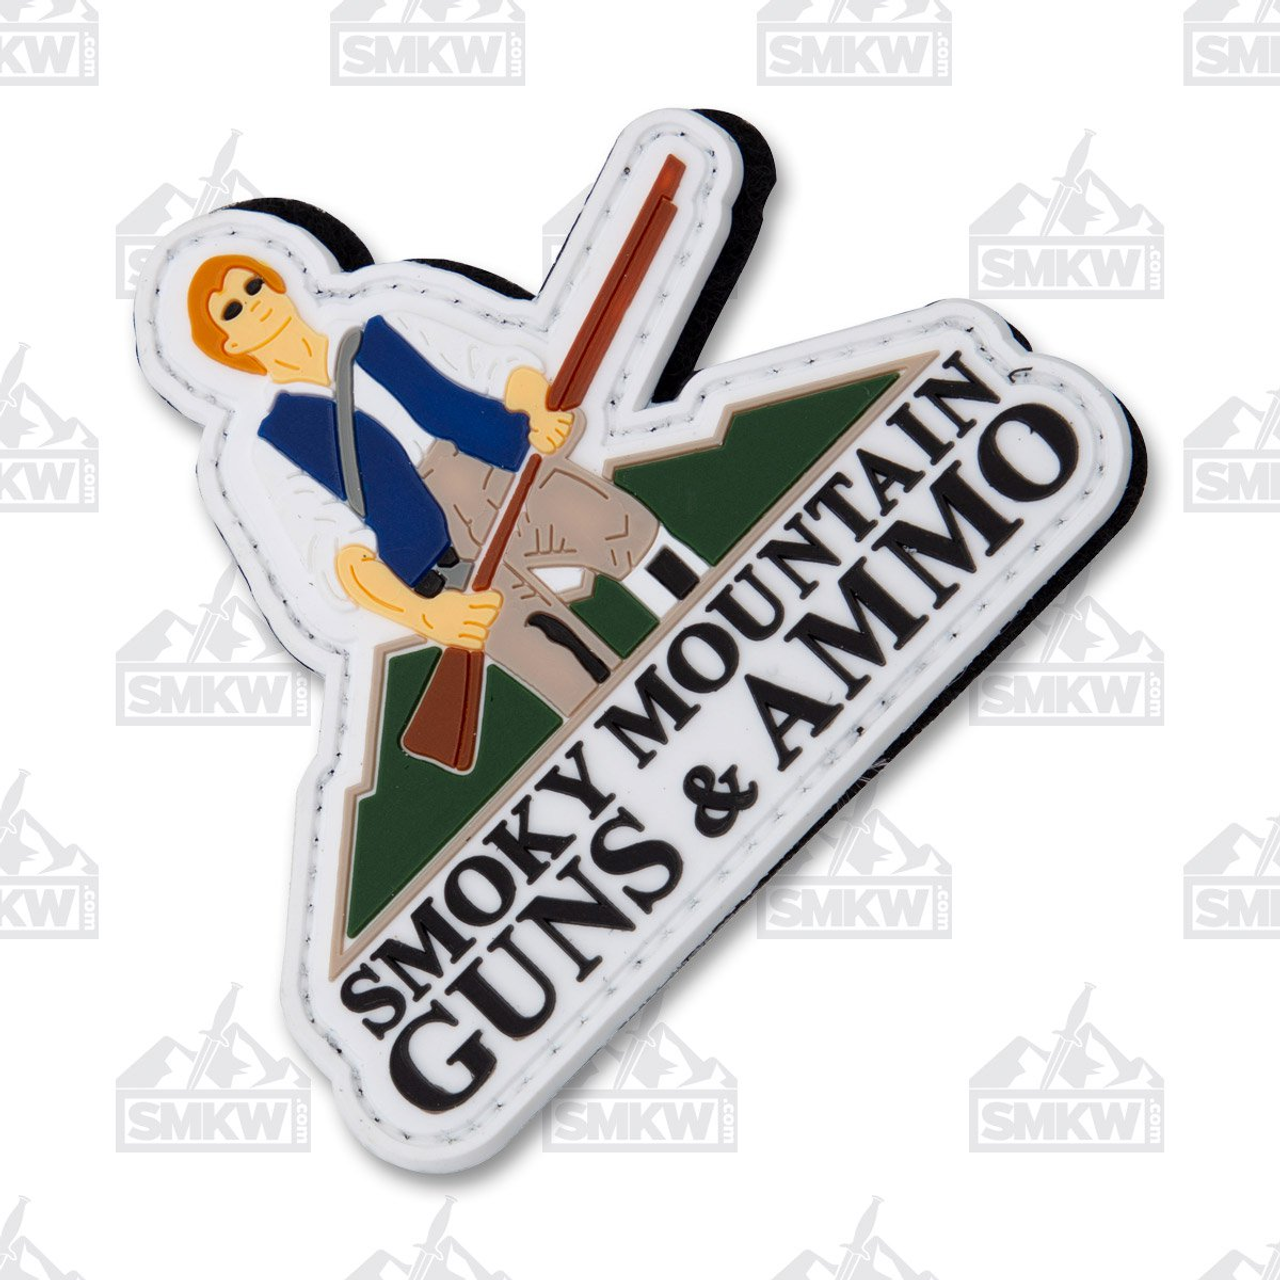 Smoky Mountain Guns and Ammo Full Color Patch - Smoky Mountain